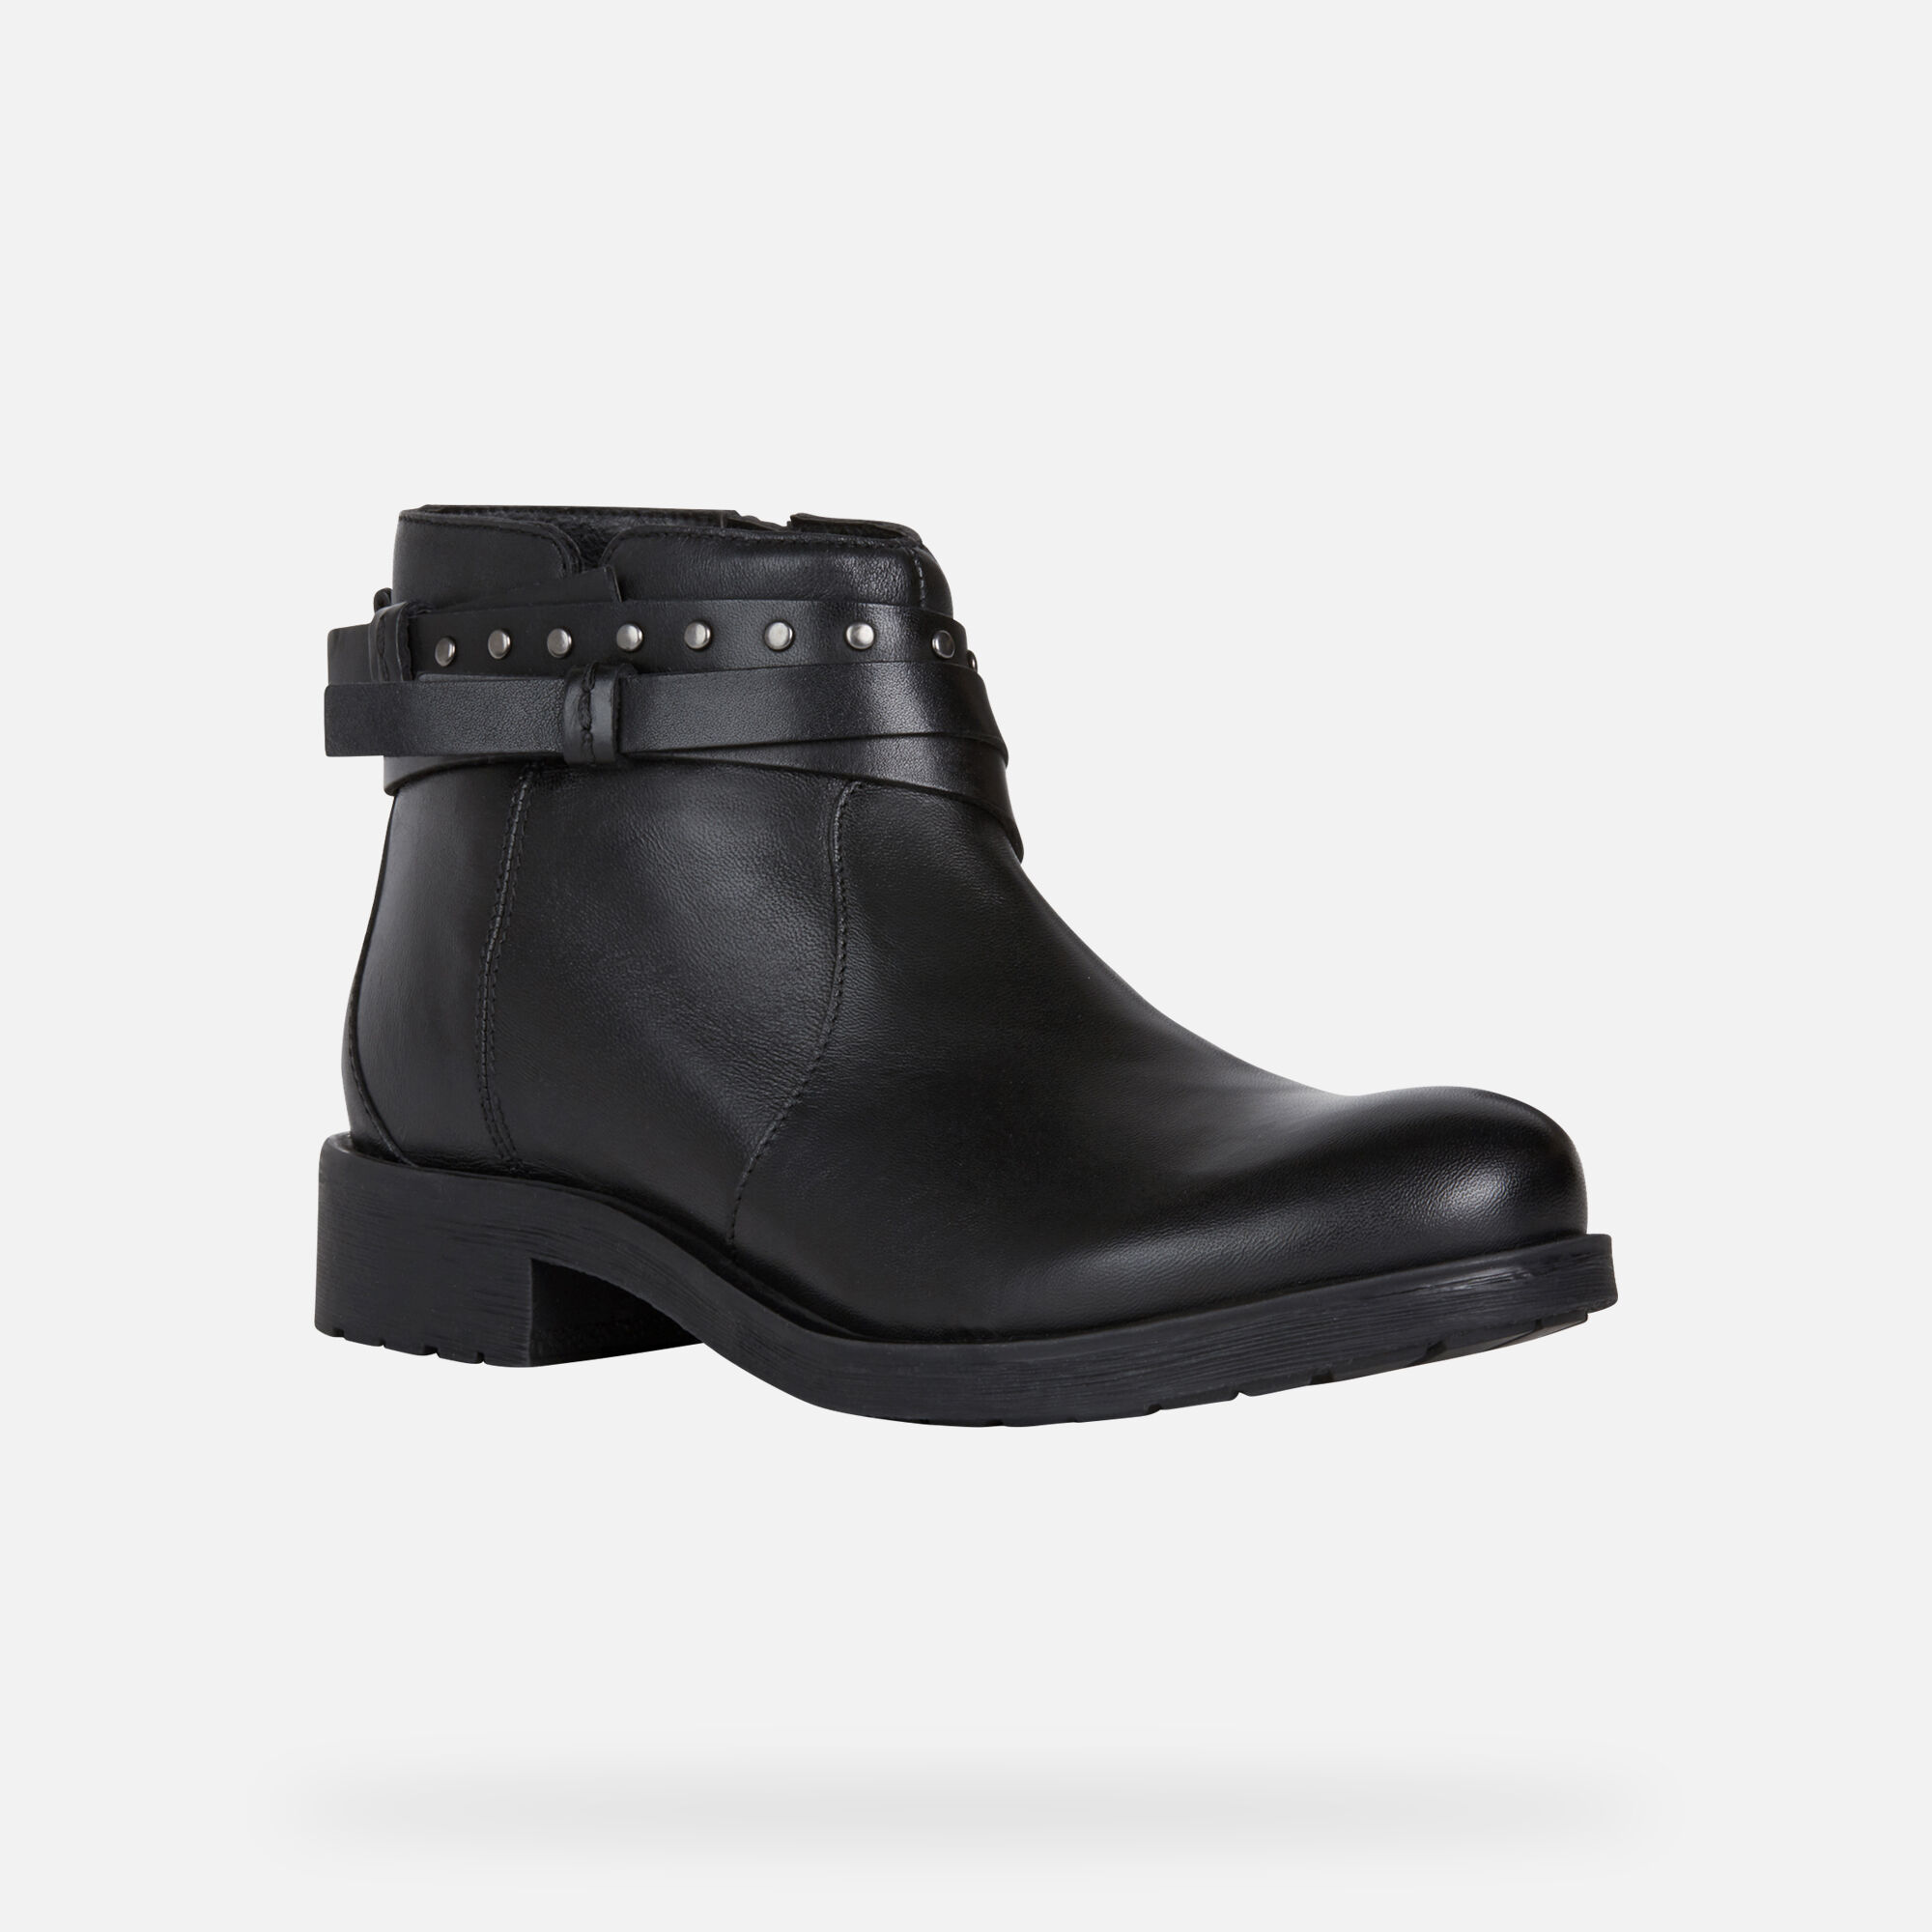 RAWELLE WOMAN - ANKLE BOOTS from women 